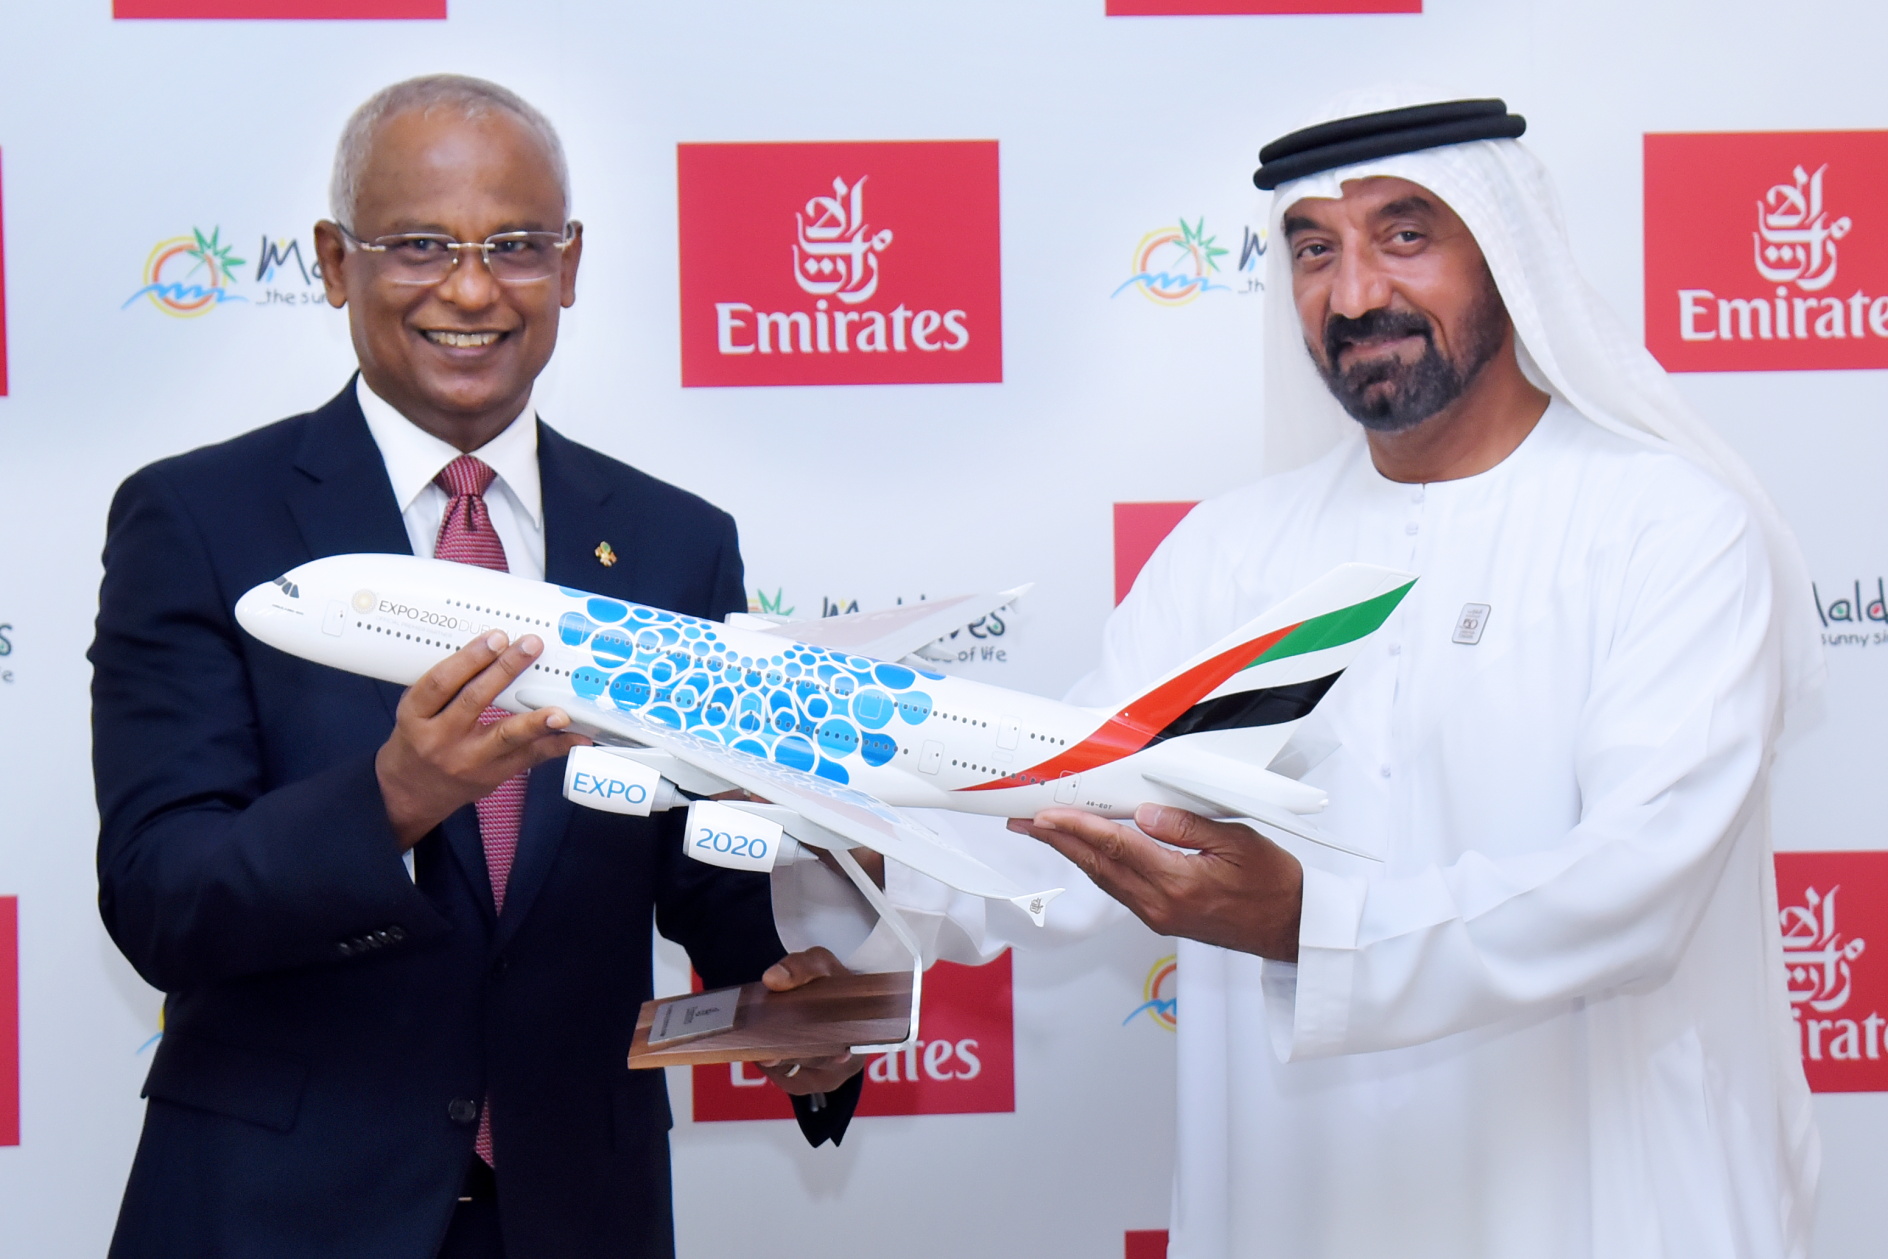 His Highness Sheikh Ahmed bin Saeed Al Maktoum (right), Chairman and Chief Executive, Emirates Airline and Group presents an Emirates A380 aircraft model to His Excellency Ibrahim Mohamed Solih, President of the Republic of Maldives. Click to enlarge.